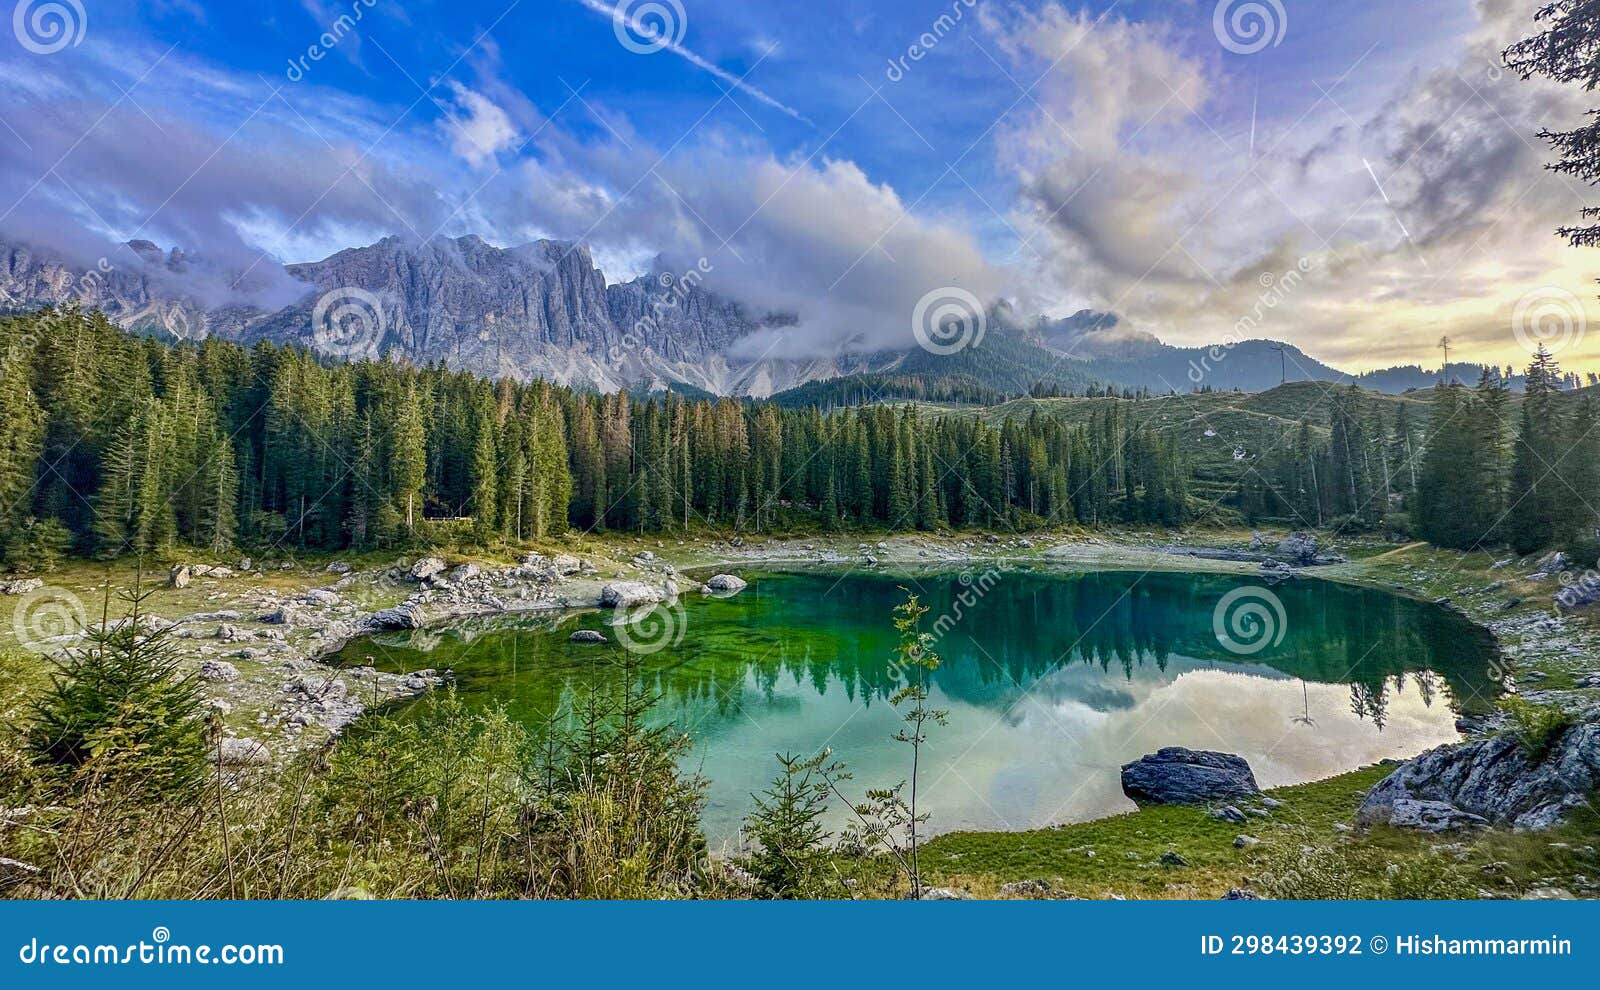 lago di carezza,nestled at 1,519m, an alpine jewel with emerald waters